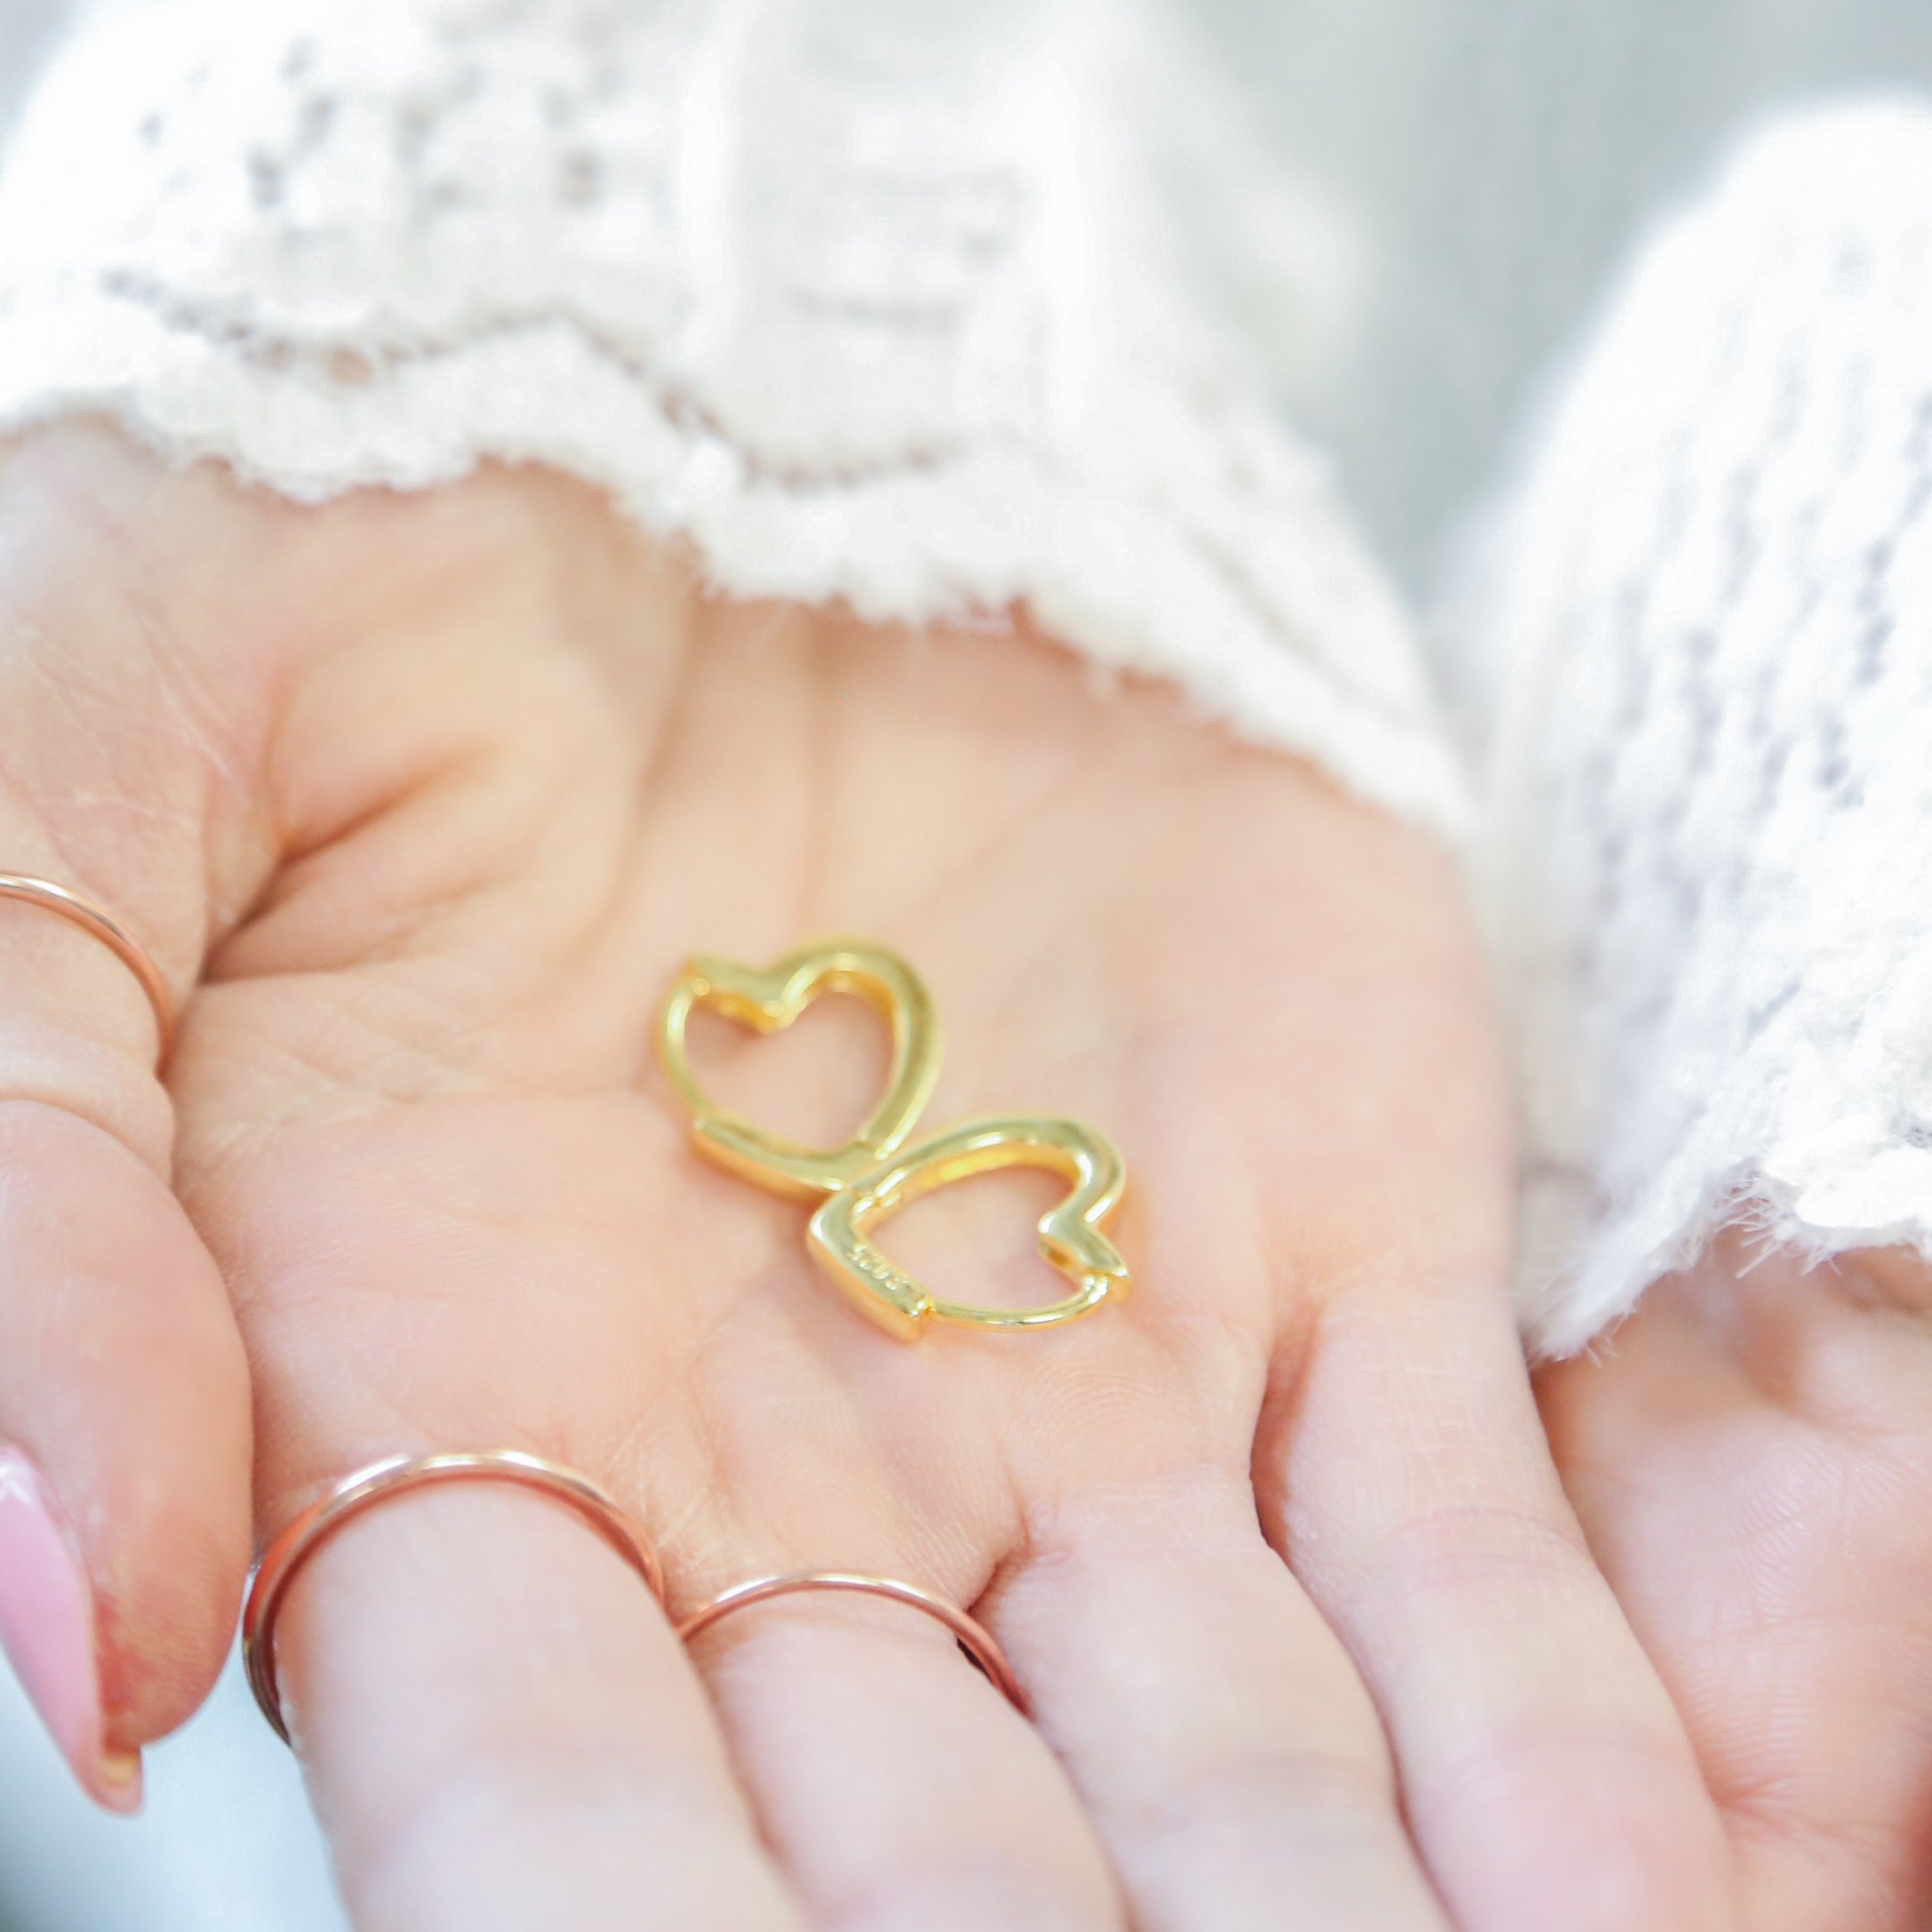 a woman's hand holding a gold heart shaped ring